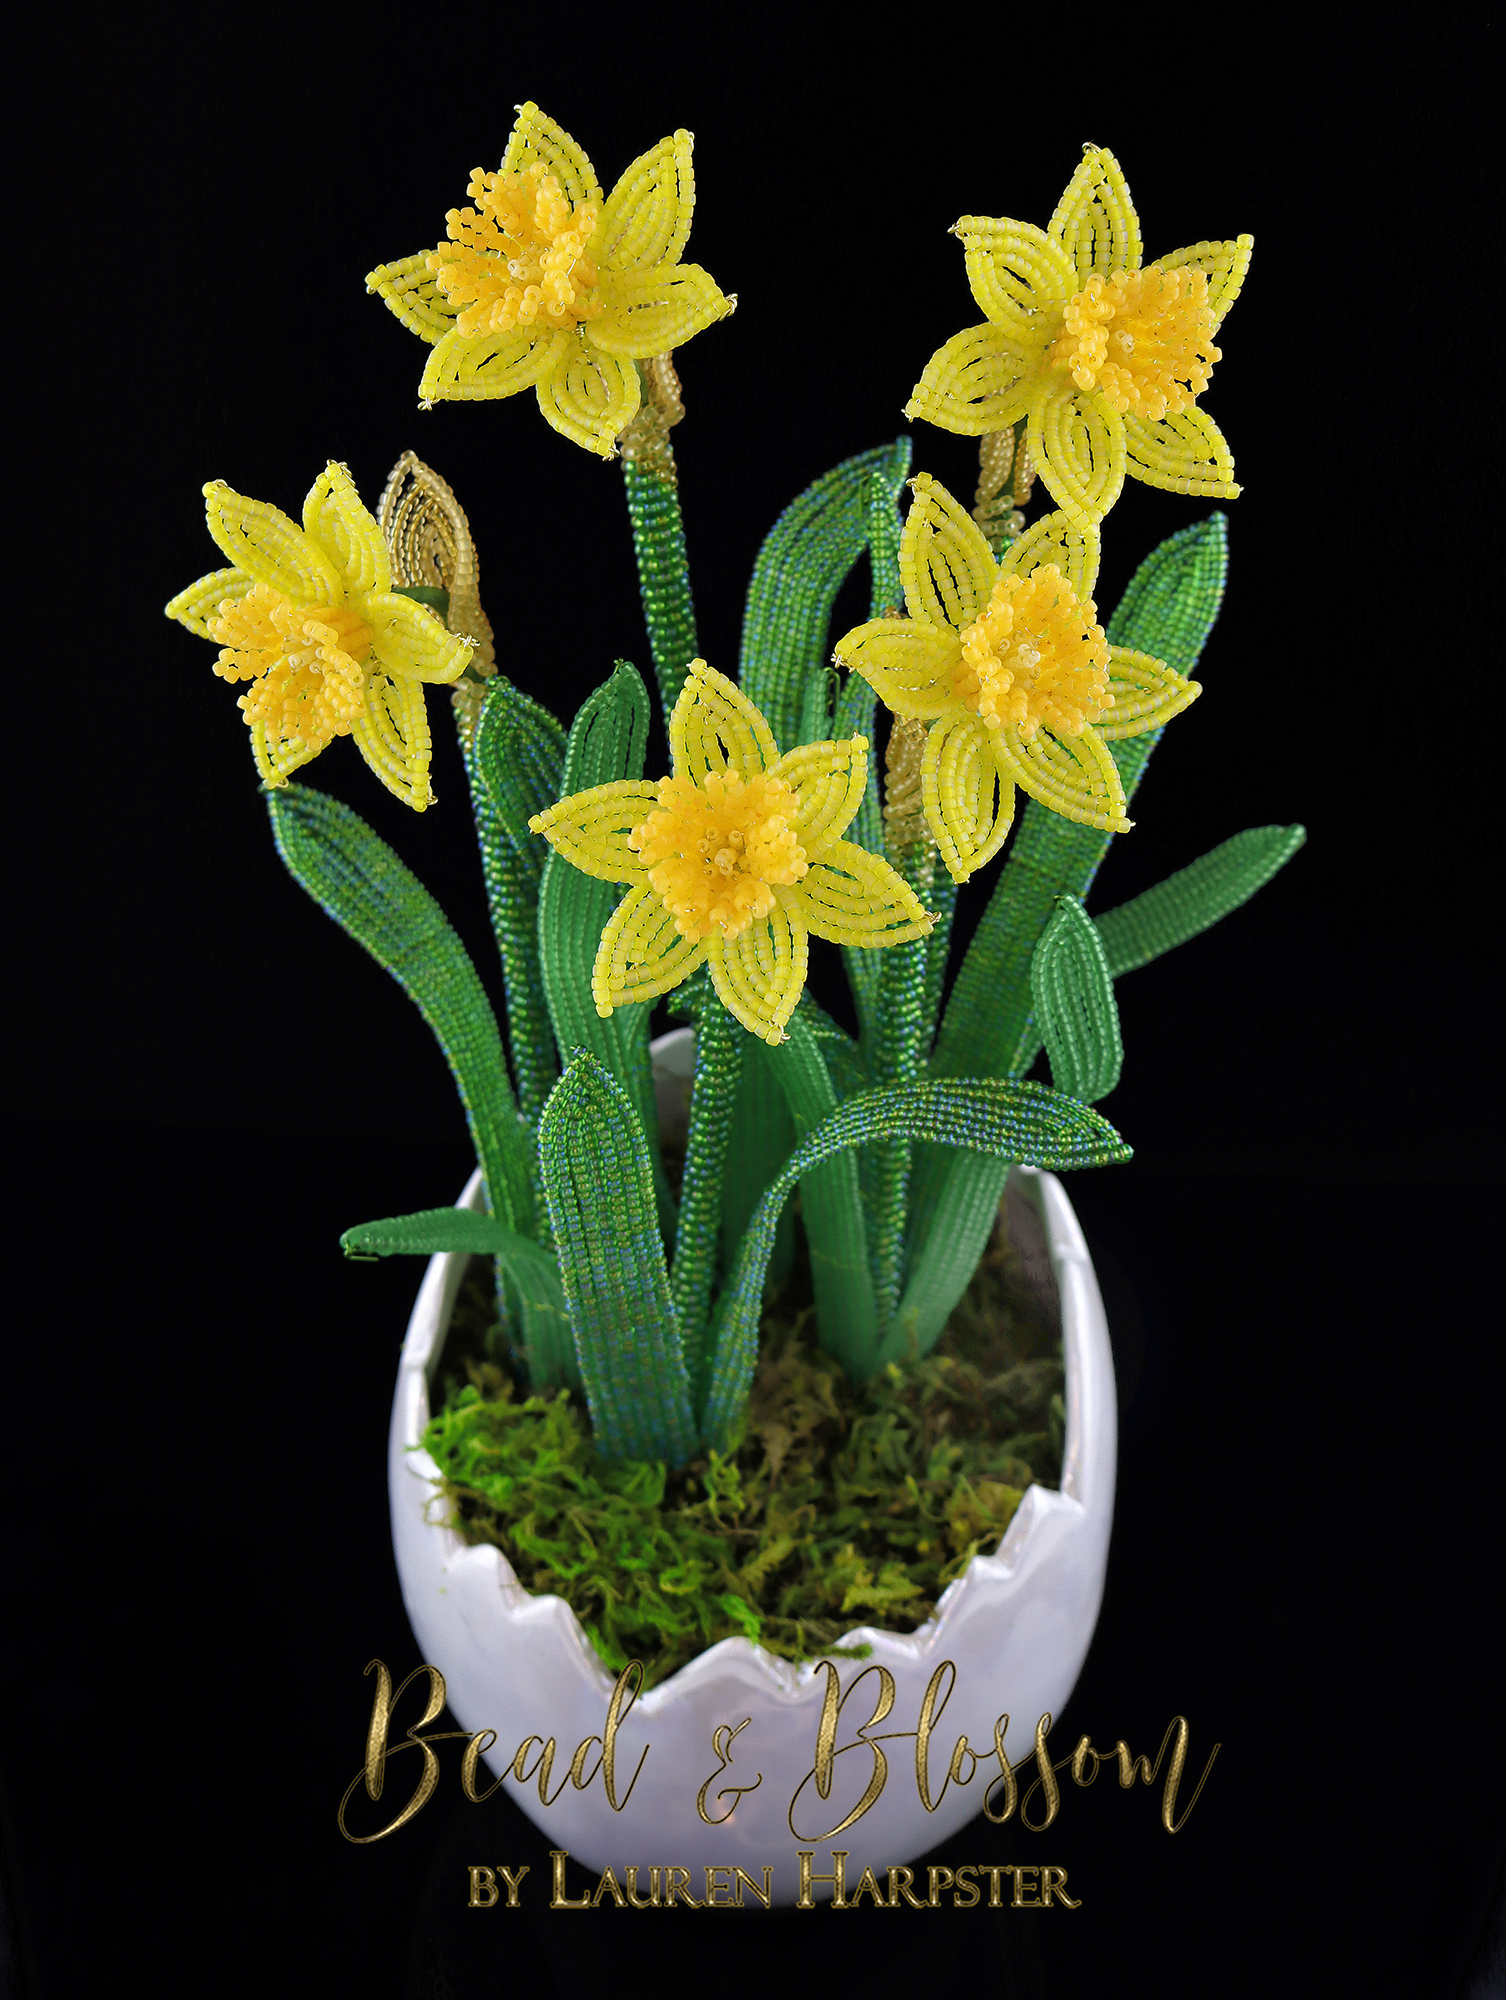 French Beaded Miniature Daffodils by Lauren Harpster